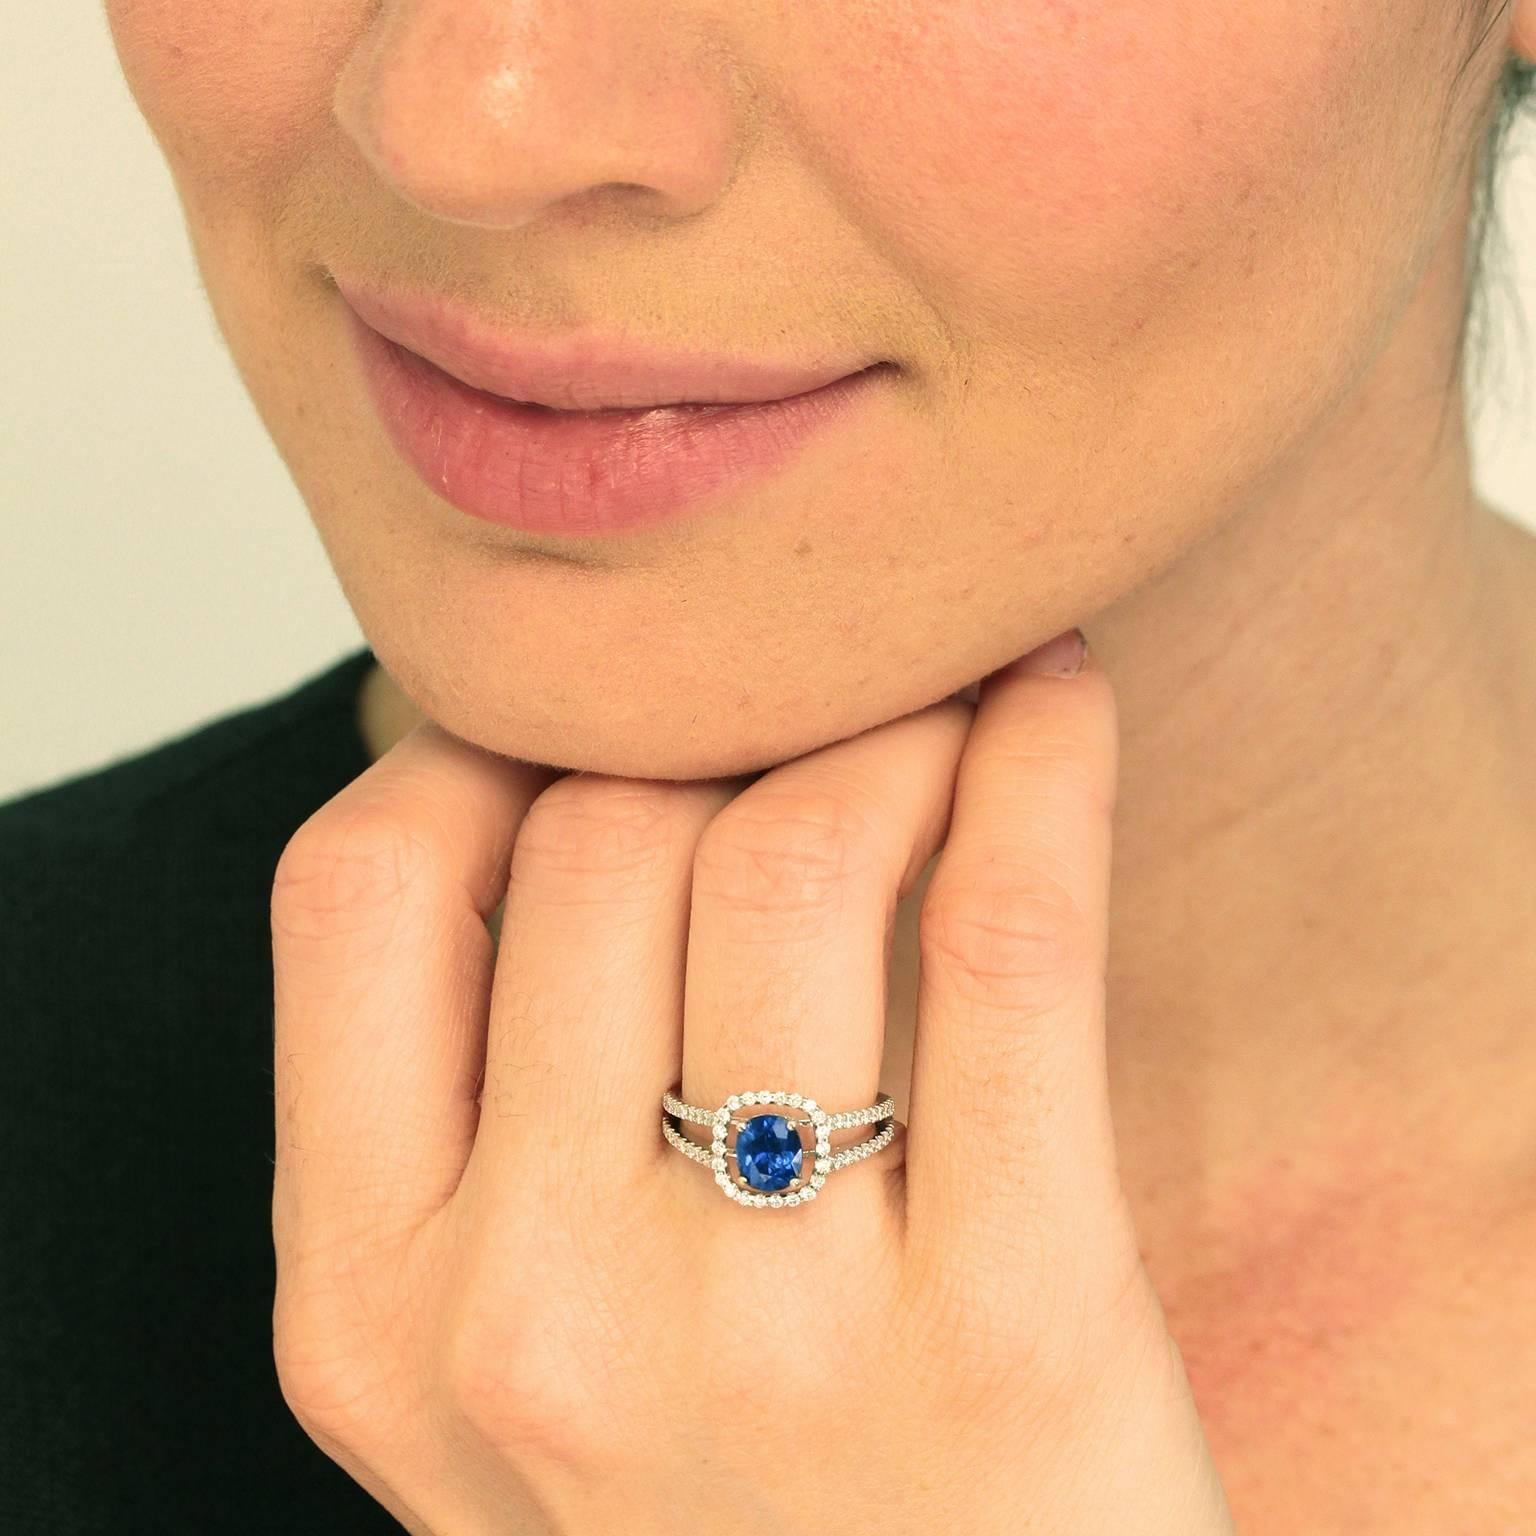 Circa 2000, 18k, American. Sleek contemporary design, bright white fire, and lush blue color come together in this stylish ring. The 1.31 carat cornflower blue sapphire is gorgeous, and the .53 carats of diamonds are of superior quality. The